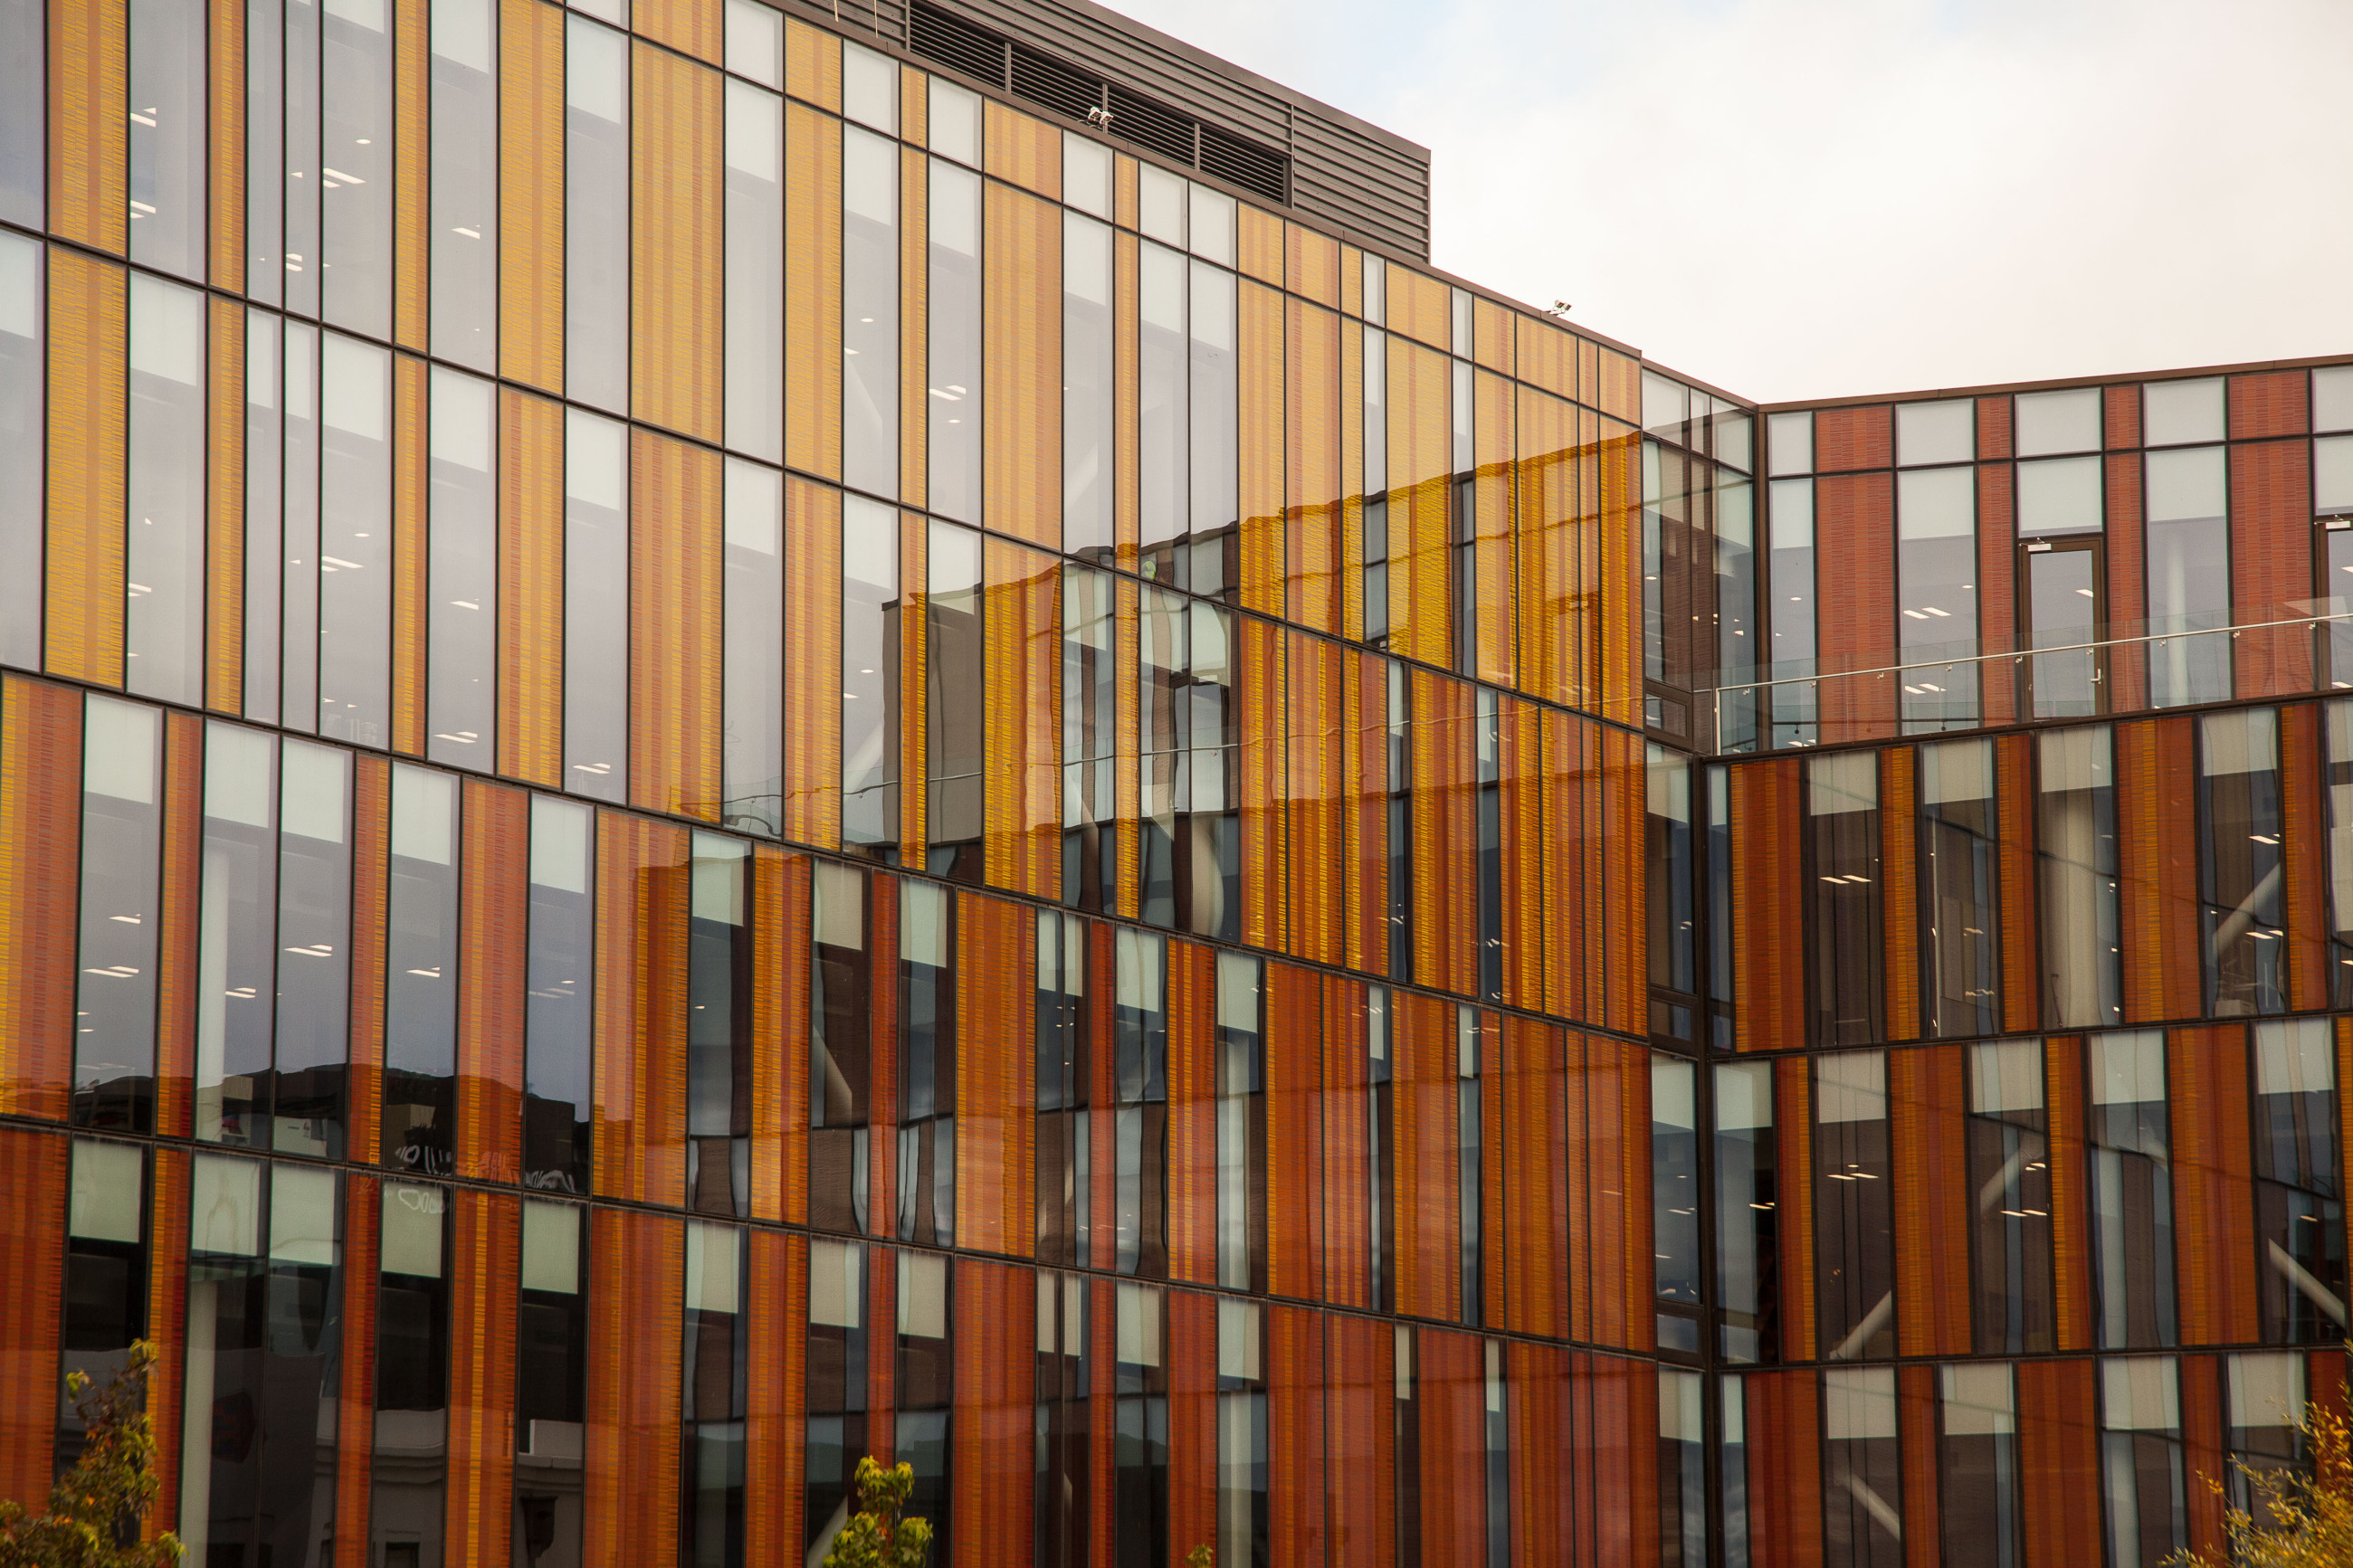 Glass canopied building with a striking wood patterns